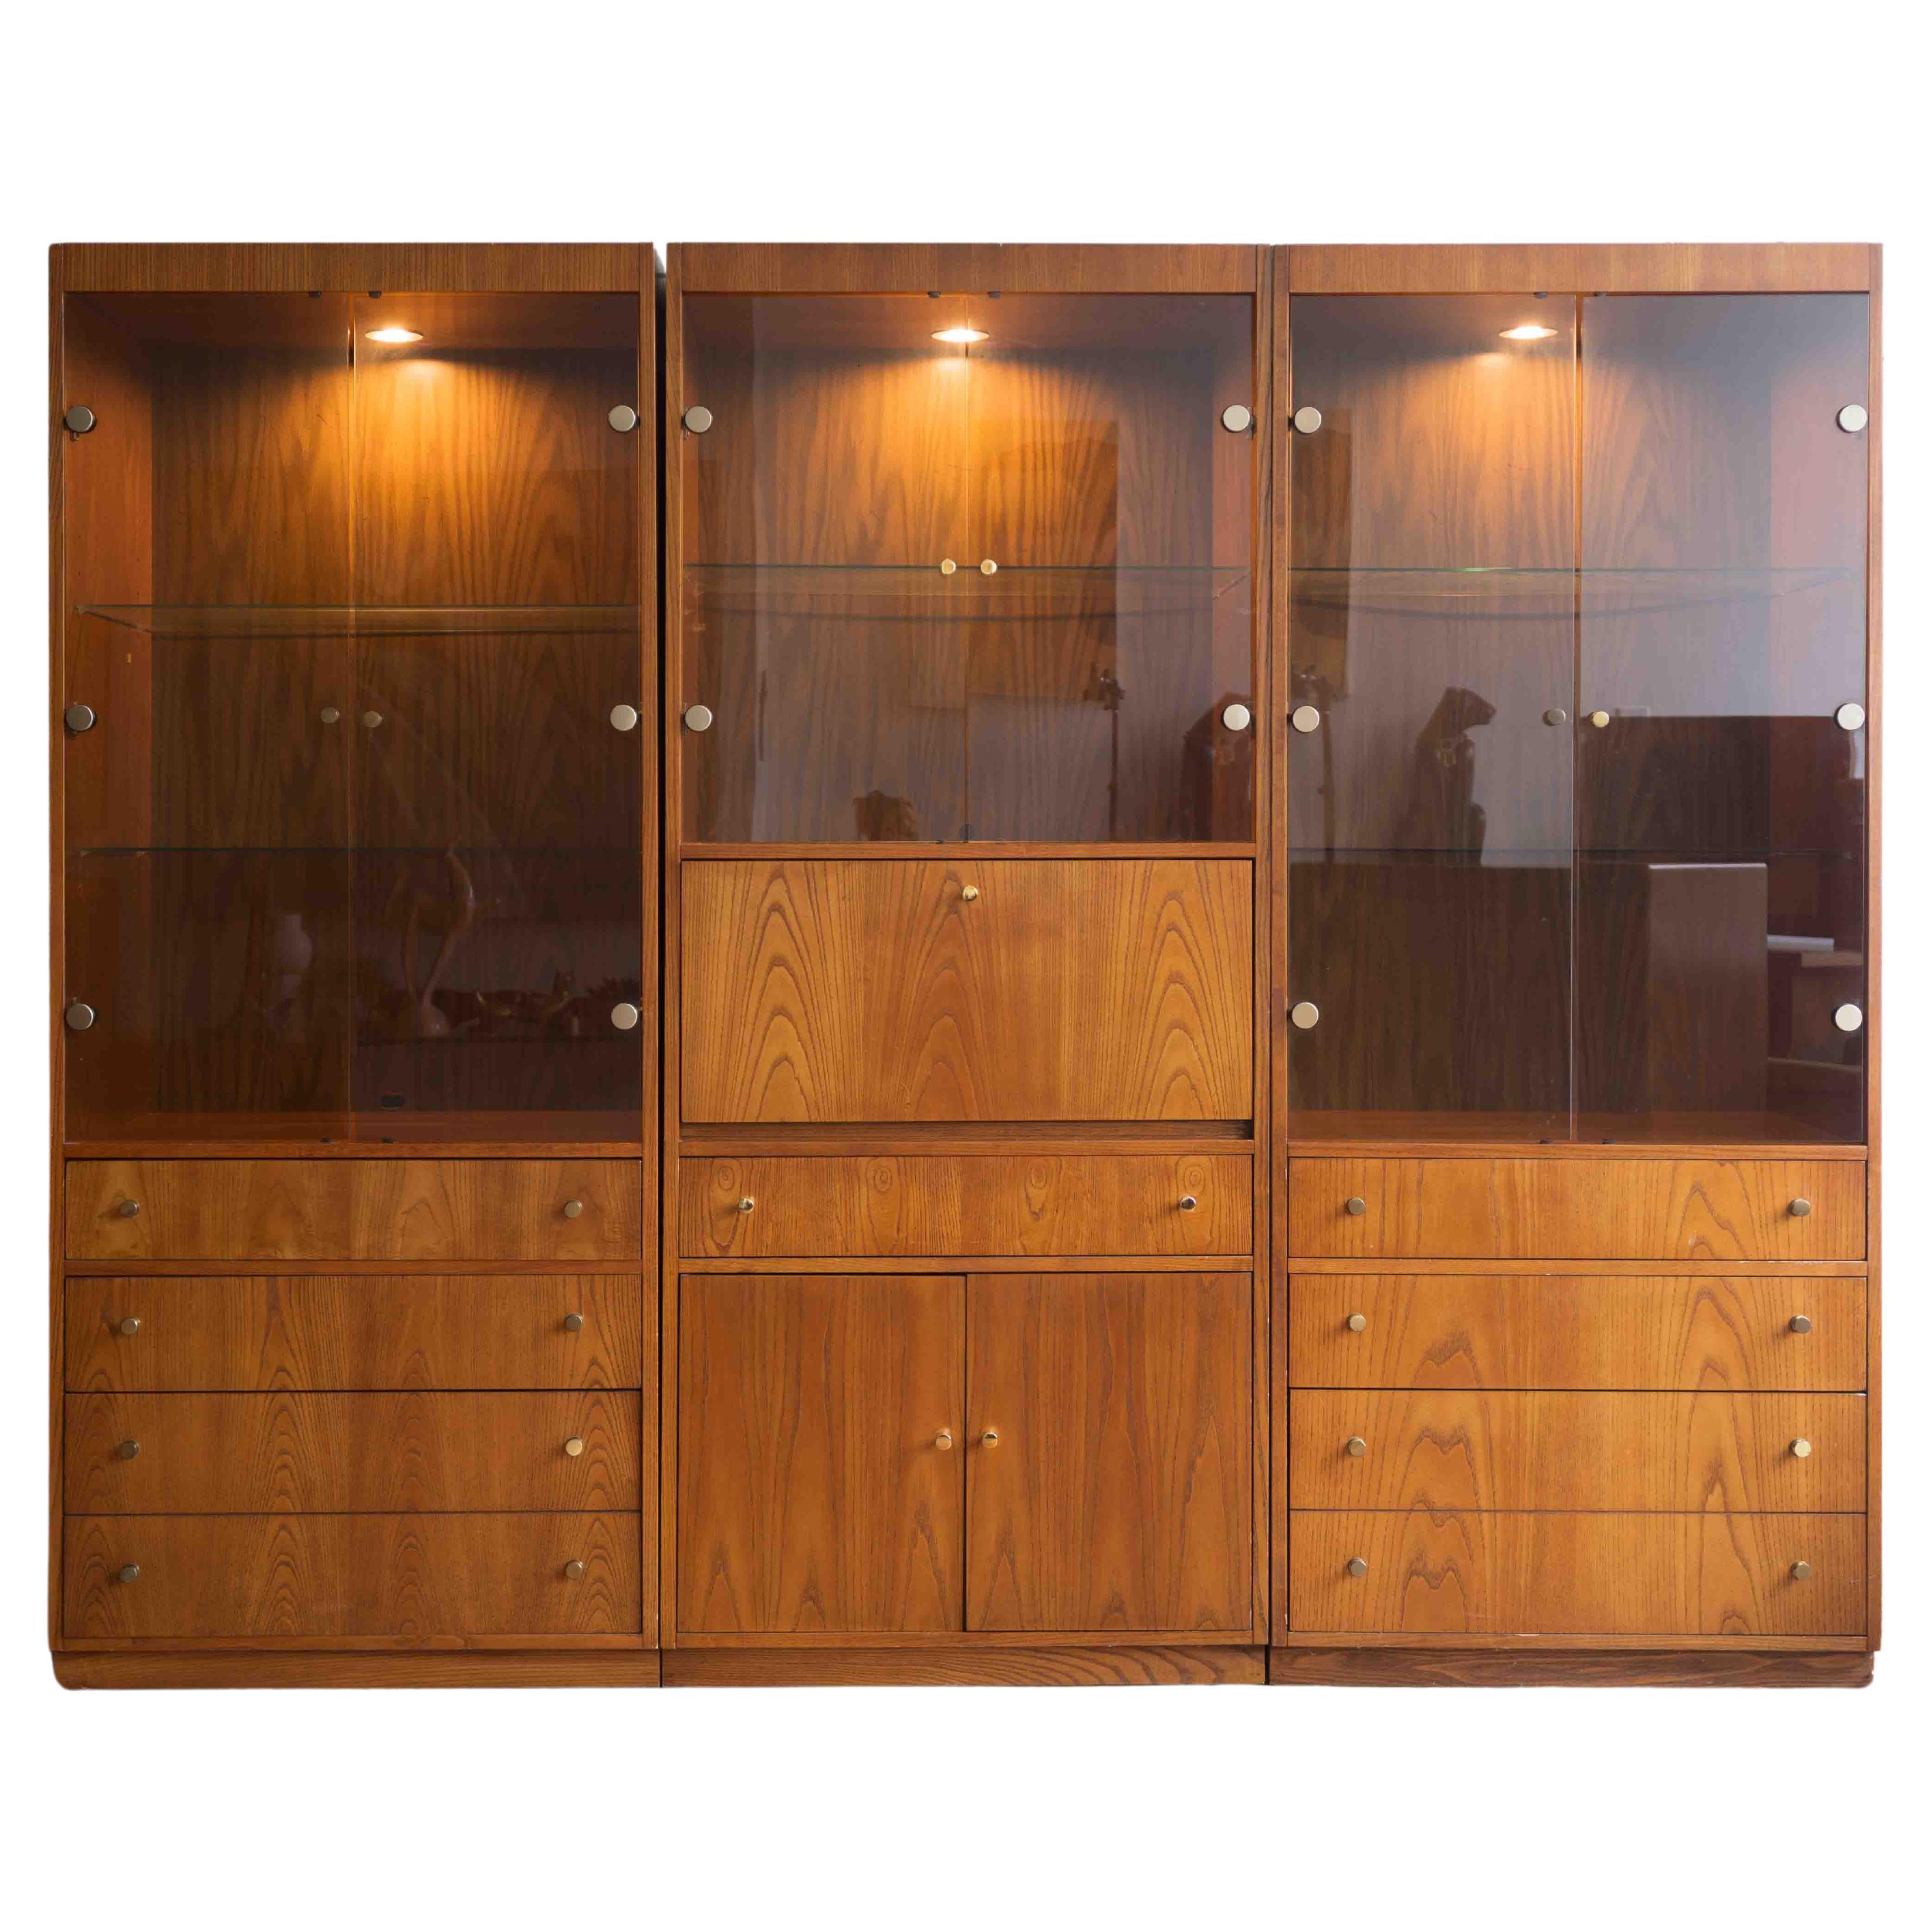 Mid-century 3 bay lighted display cabinet / wall unit with desk